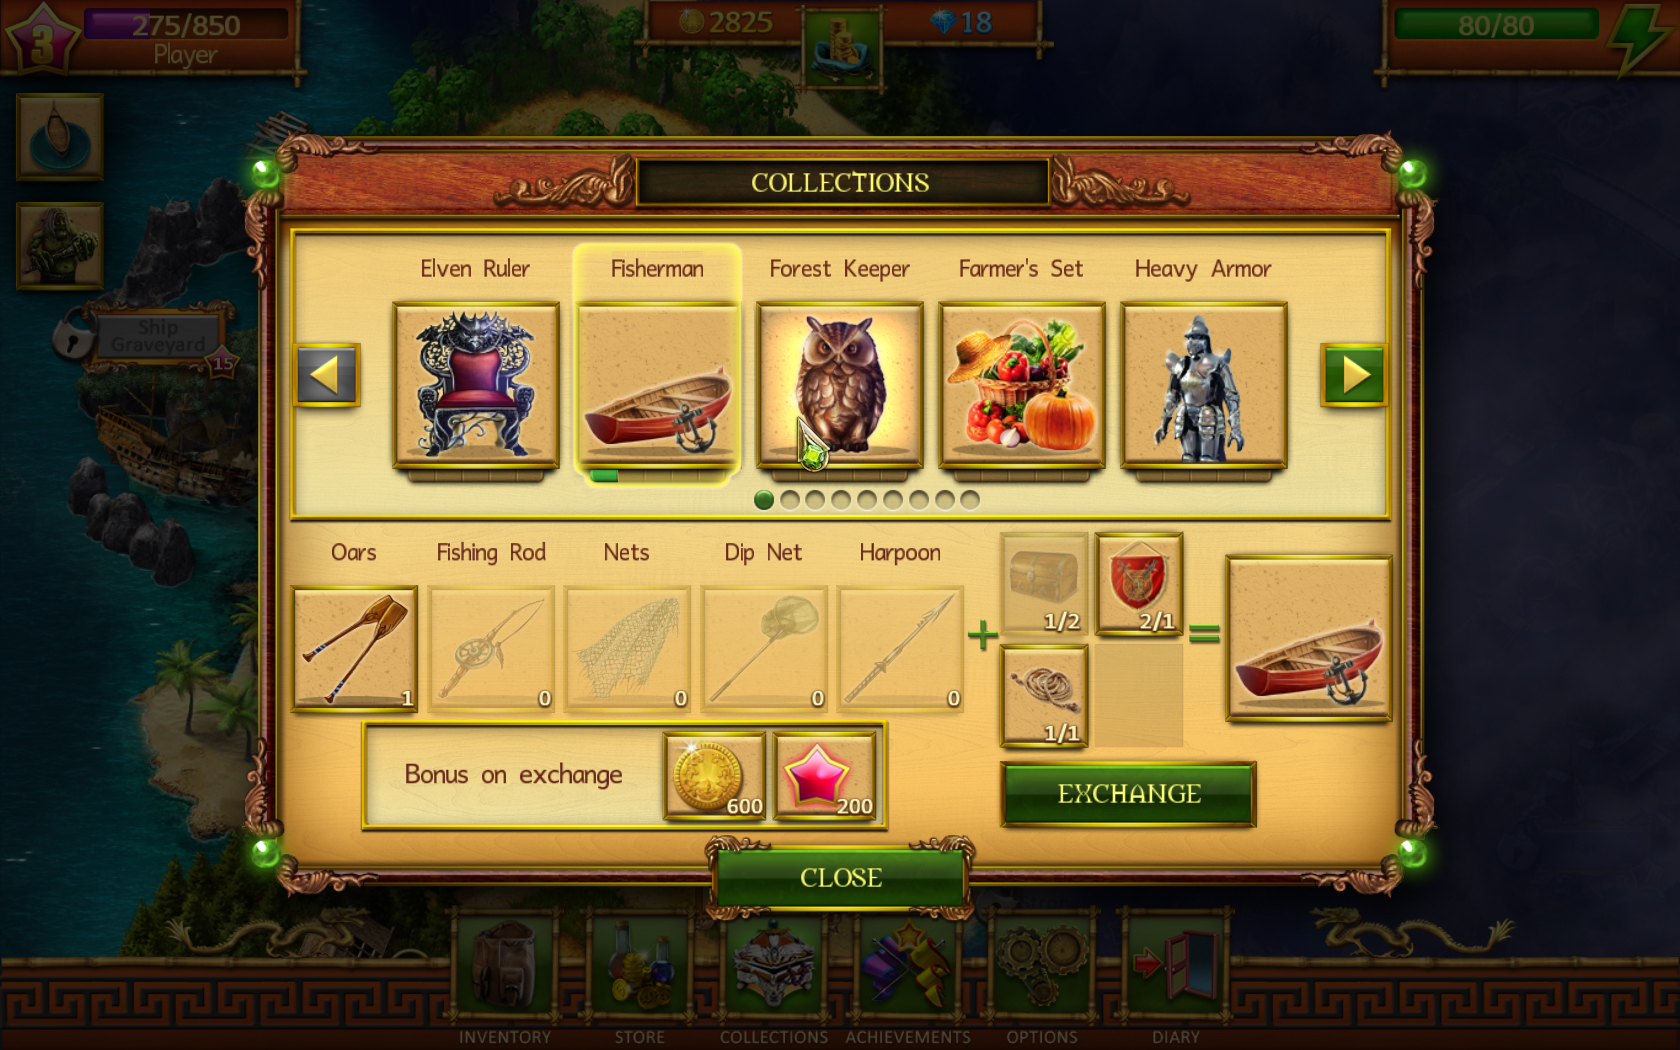 for android download Lost Lands: Mahjong